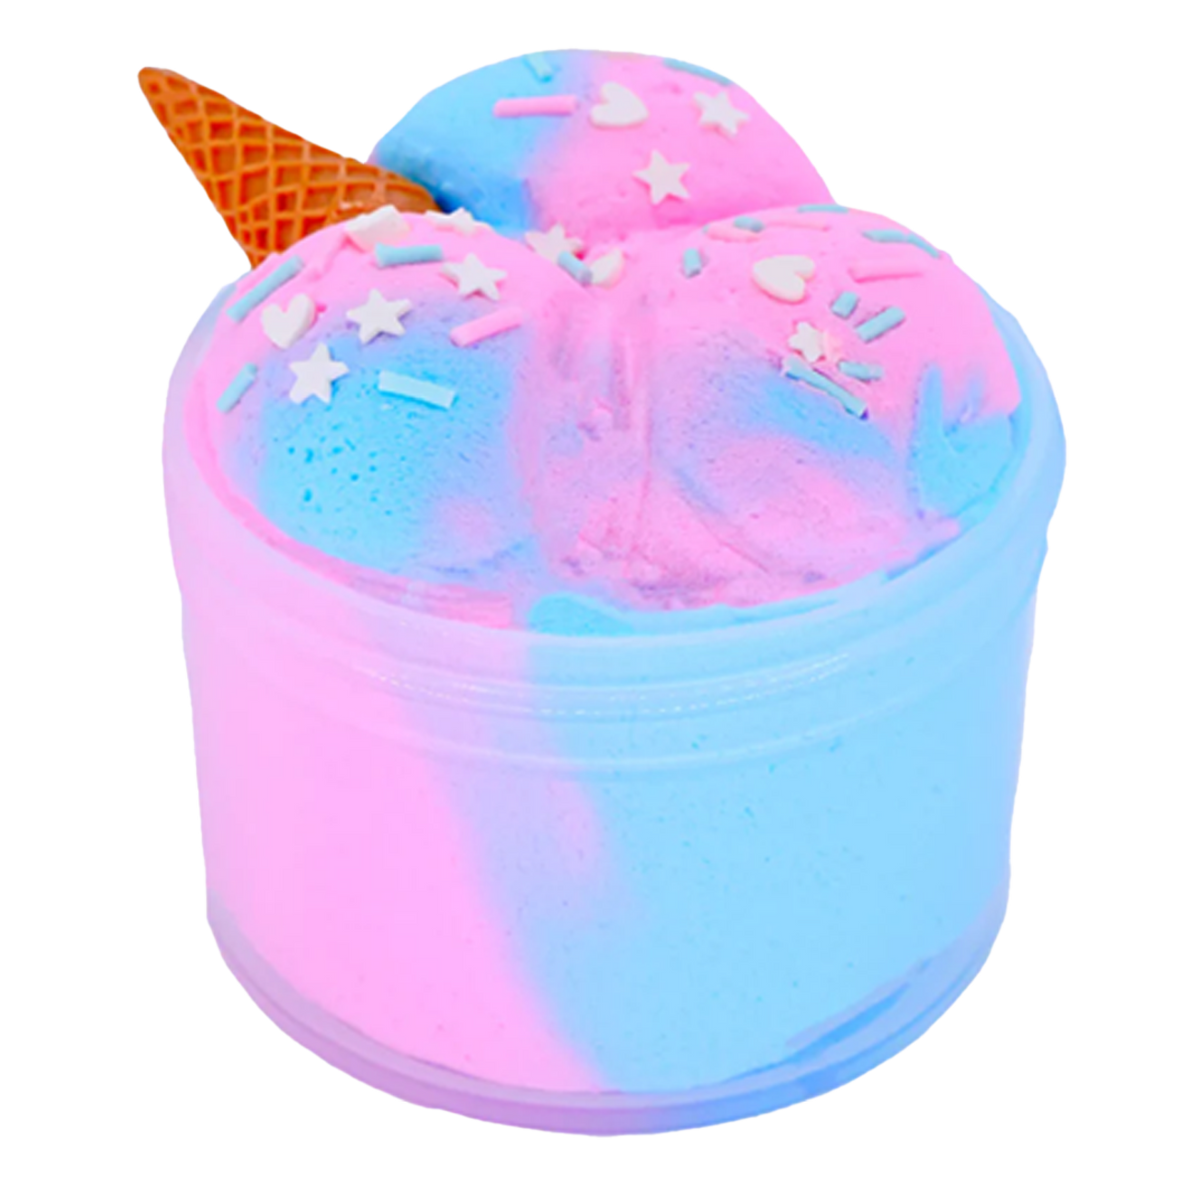 Cotton Candy Ice Cream Scoops DIY Slime Kit